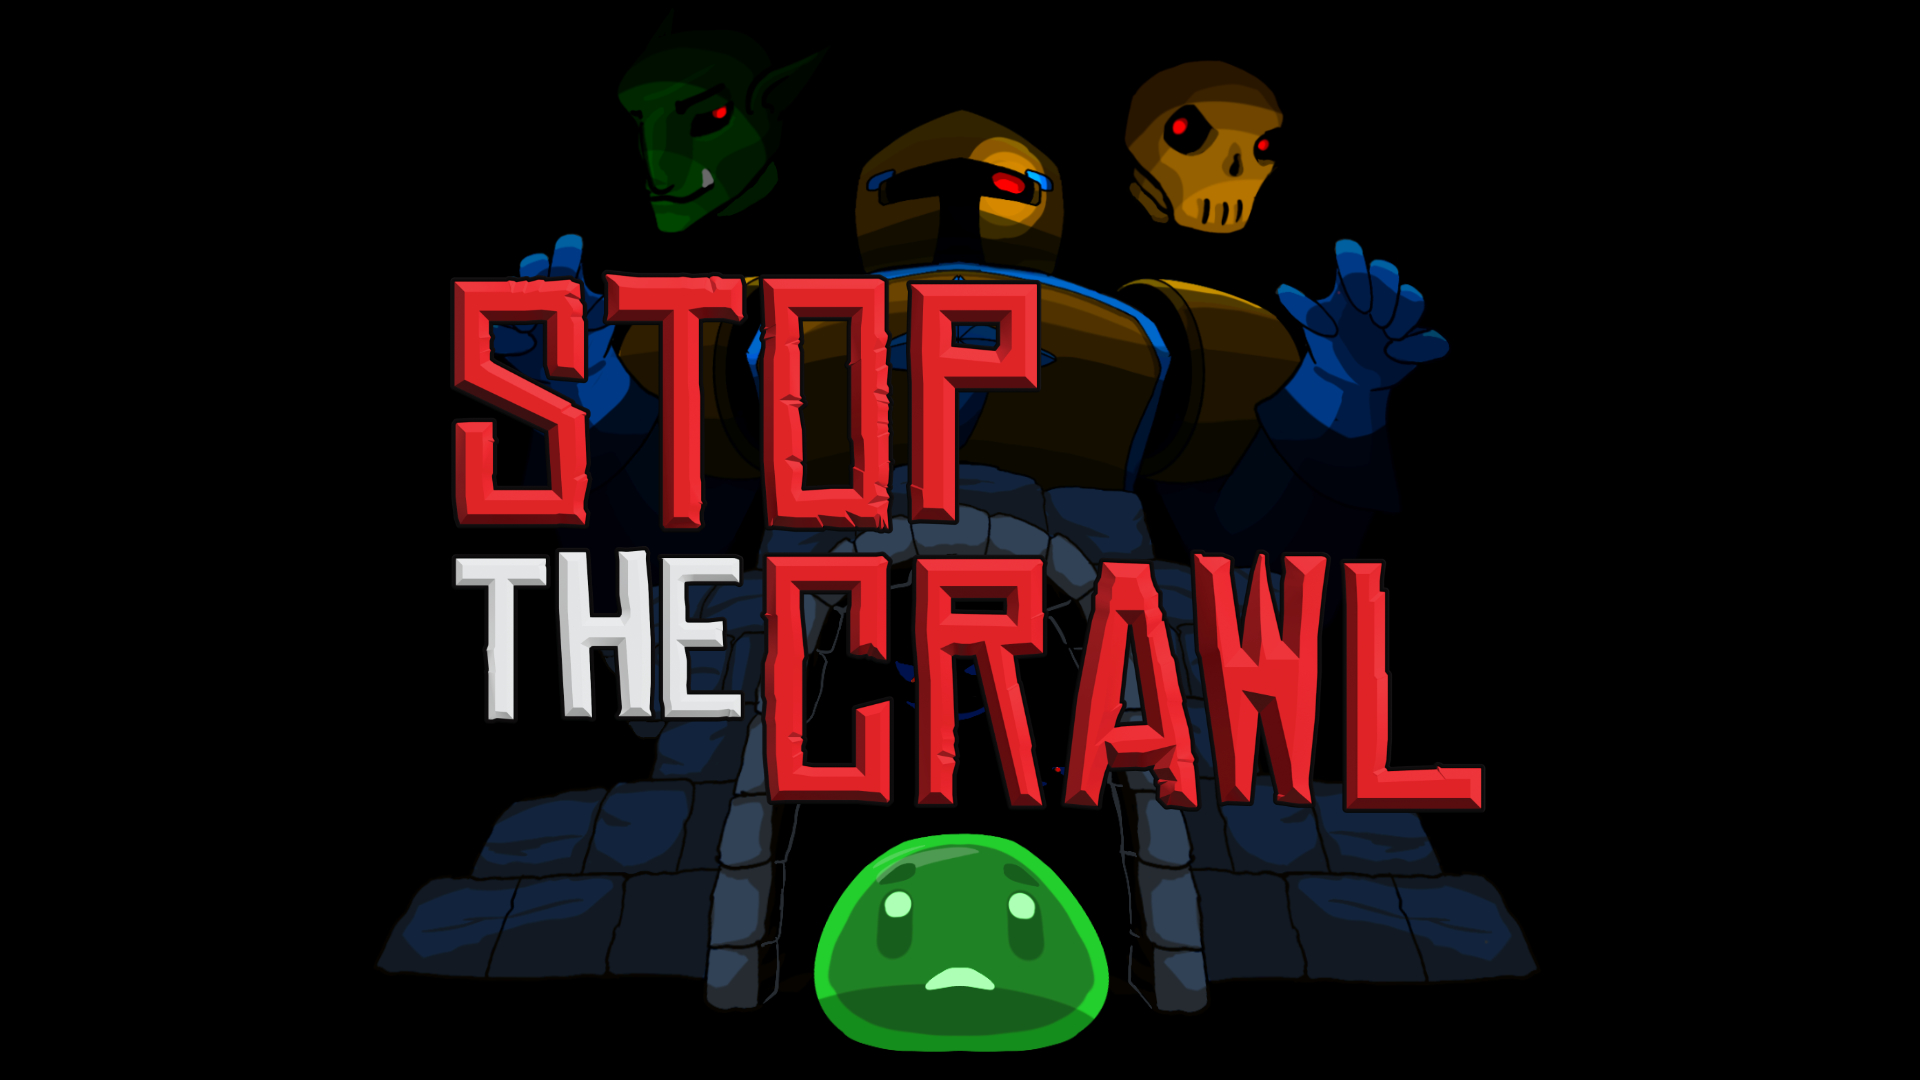 Our Next Game: Stop the Crawl